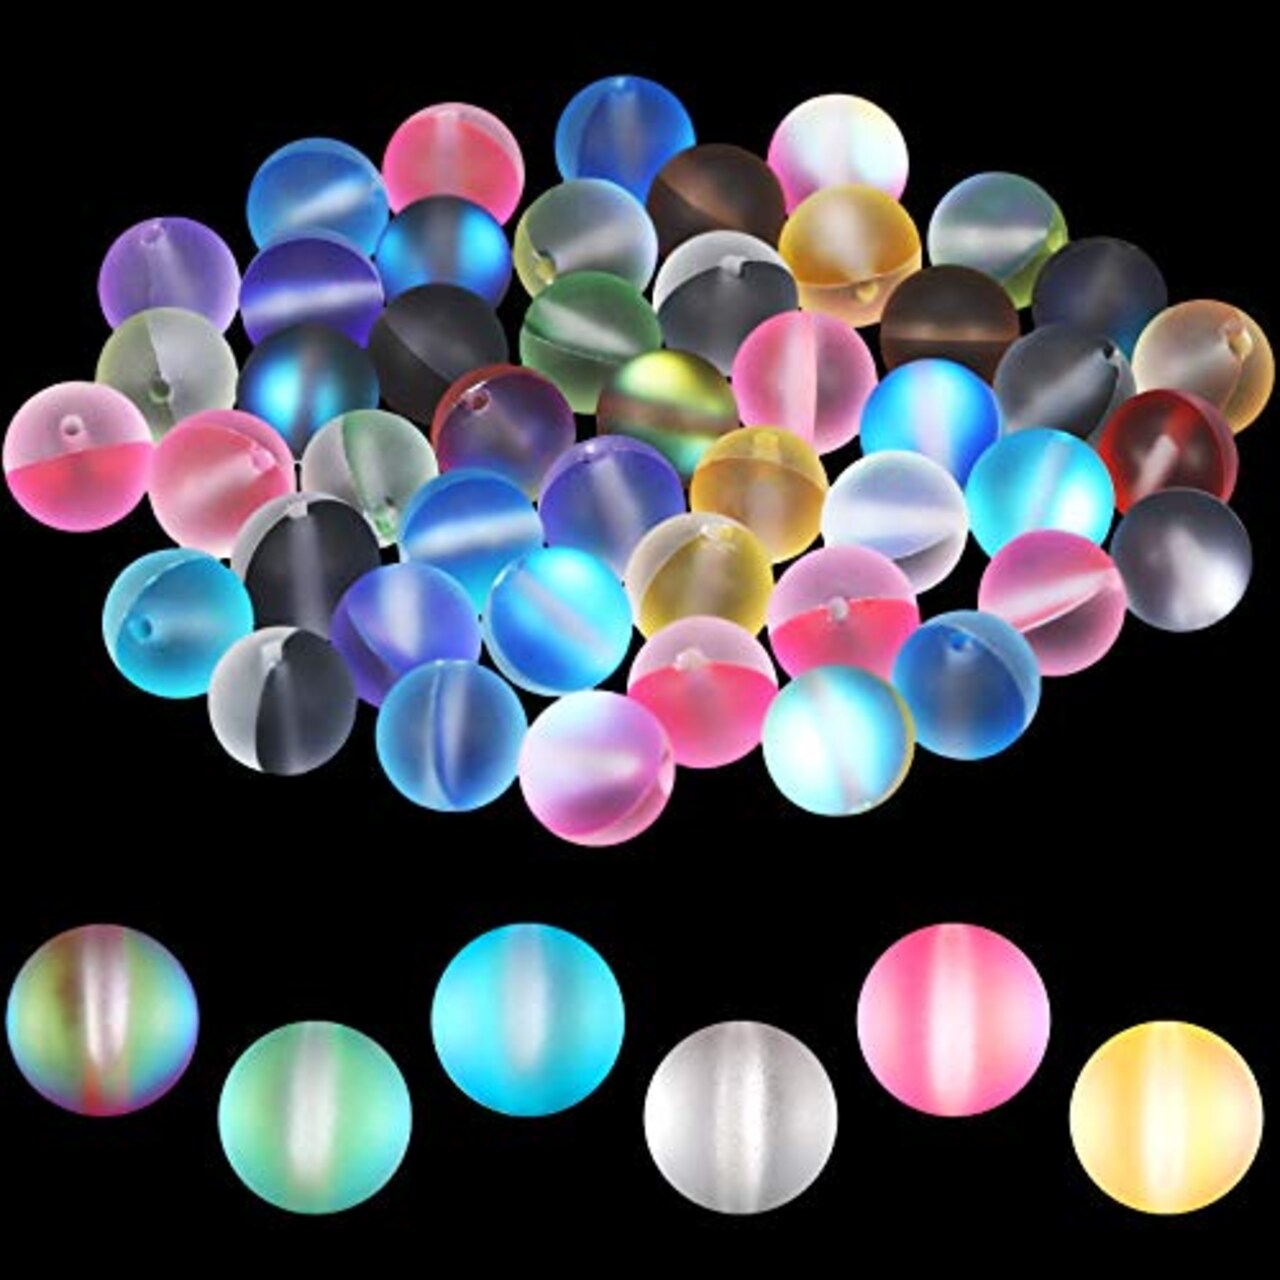 140 Pcs 8 mm Mermaid Glass Beads Bulk Matte Crystal Glass Beads Glass  Frosted Moonstone Beads for Jewelry Making Crafts DIY, Multicolor (Bright  Color)